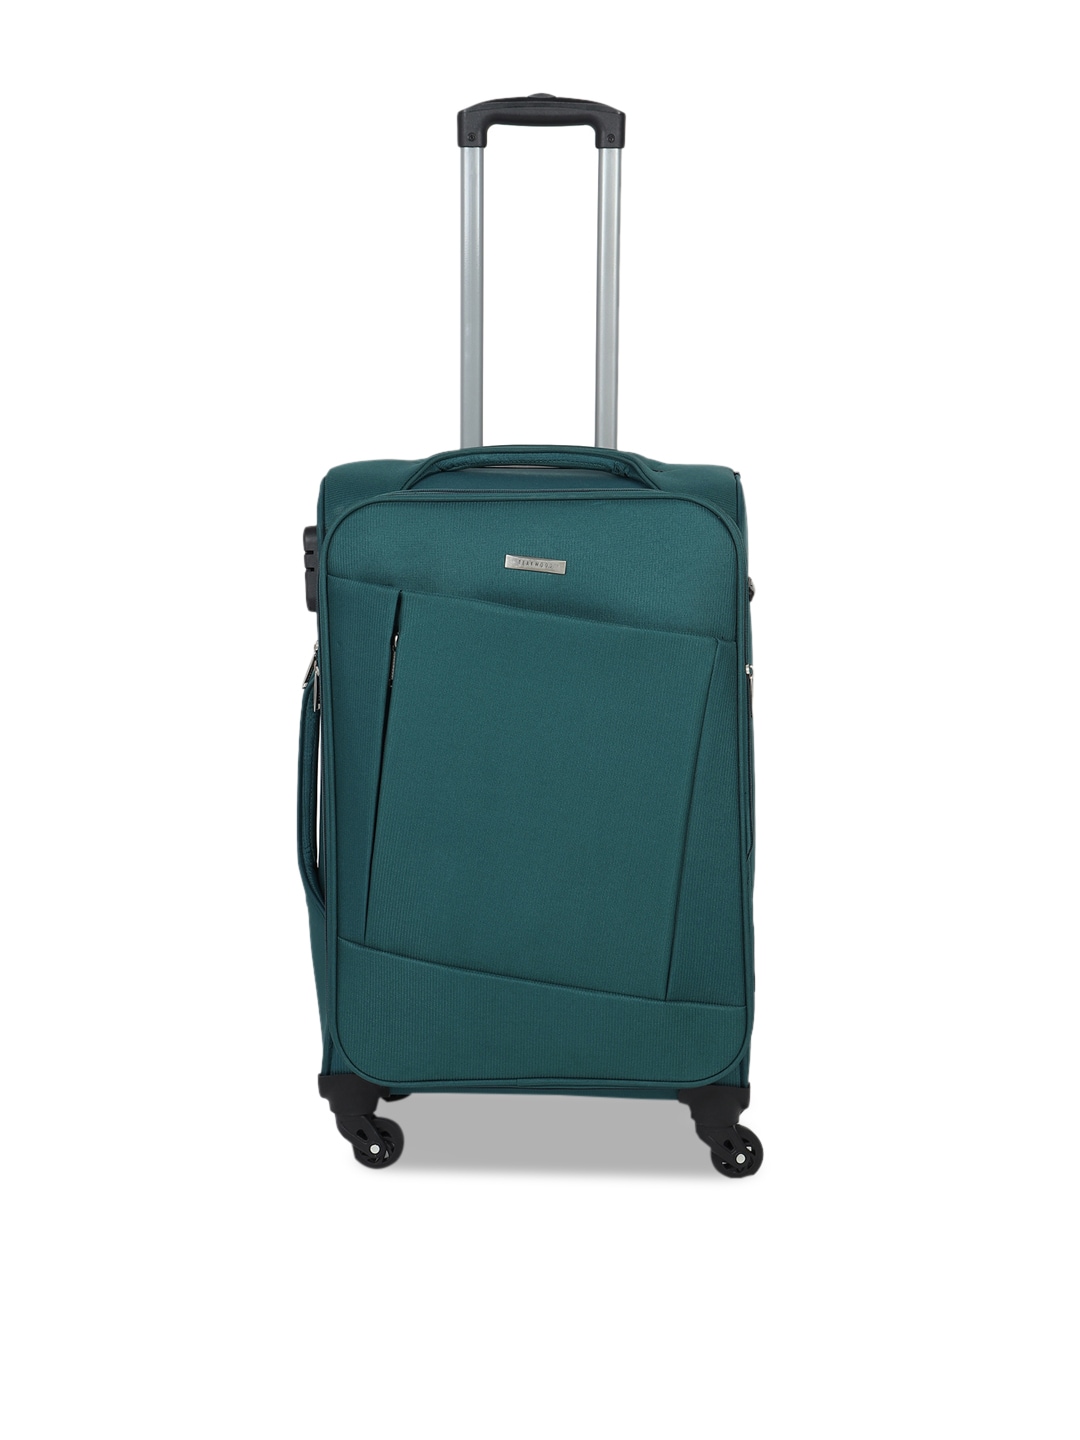 Teakwood Leathers Teal Green Solid Soft-Sided Trolley Suitcase Price in India